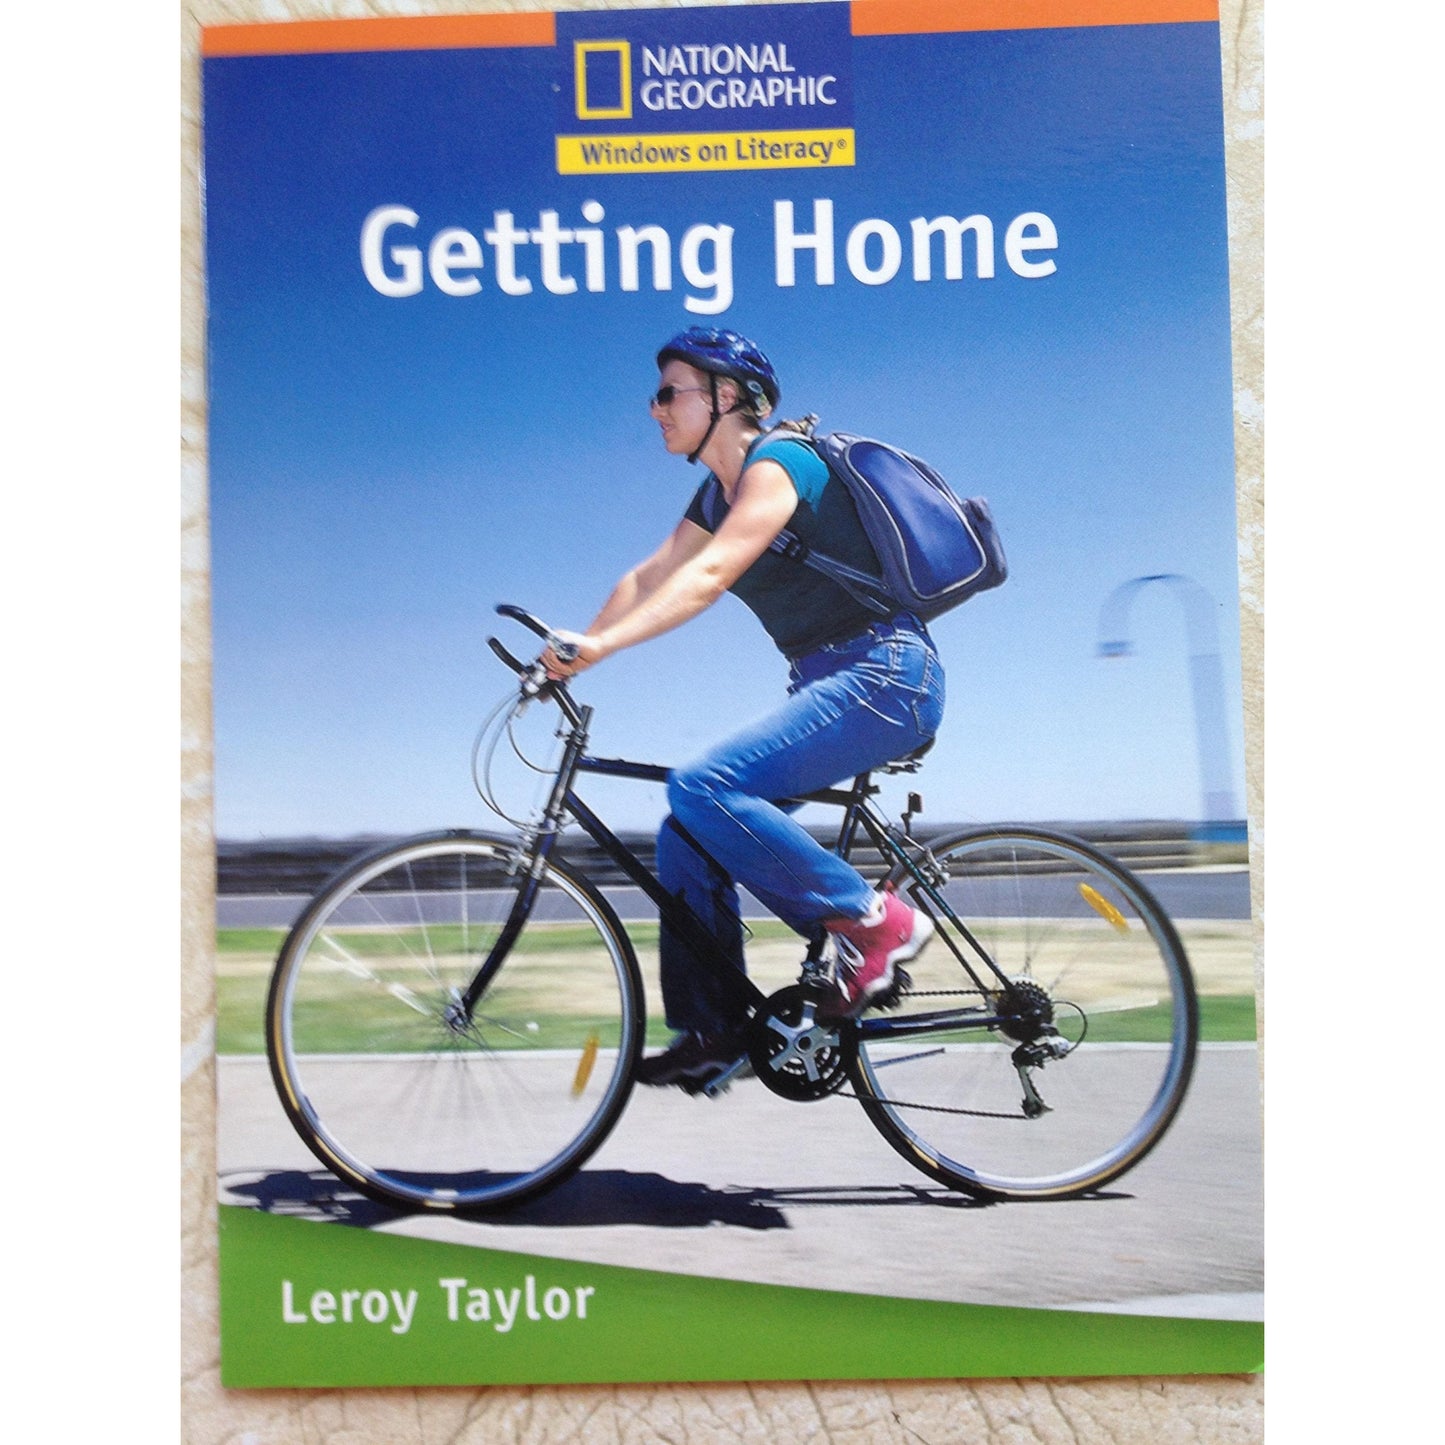 National Geographic: Windows on Literacy: Getting Home